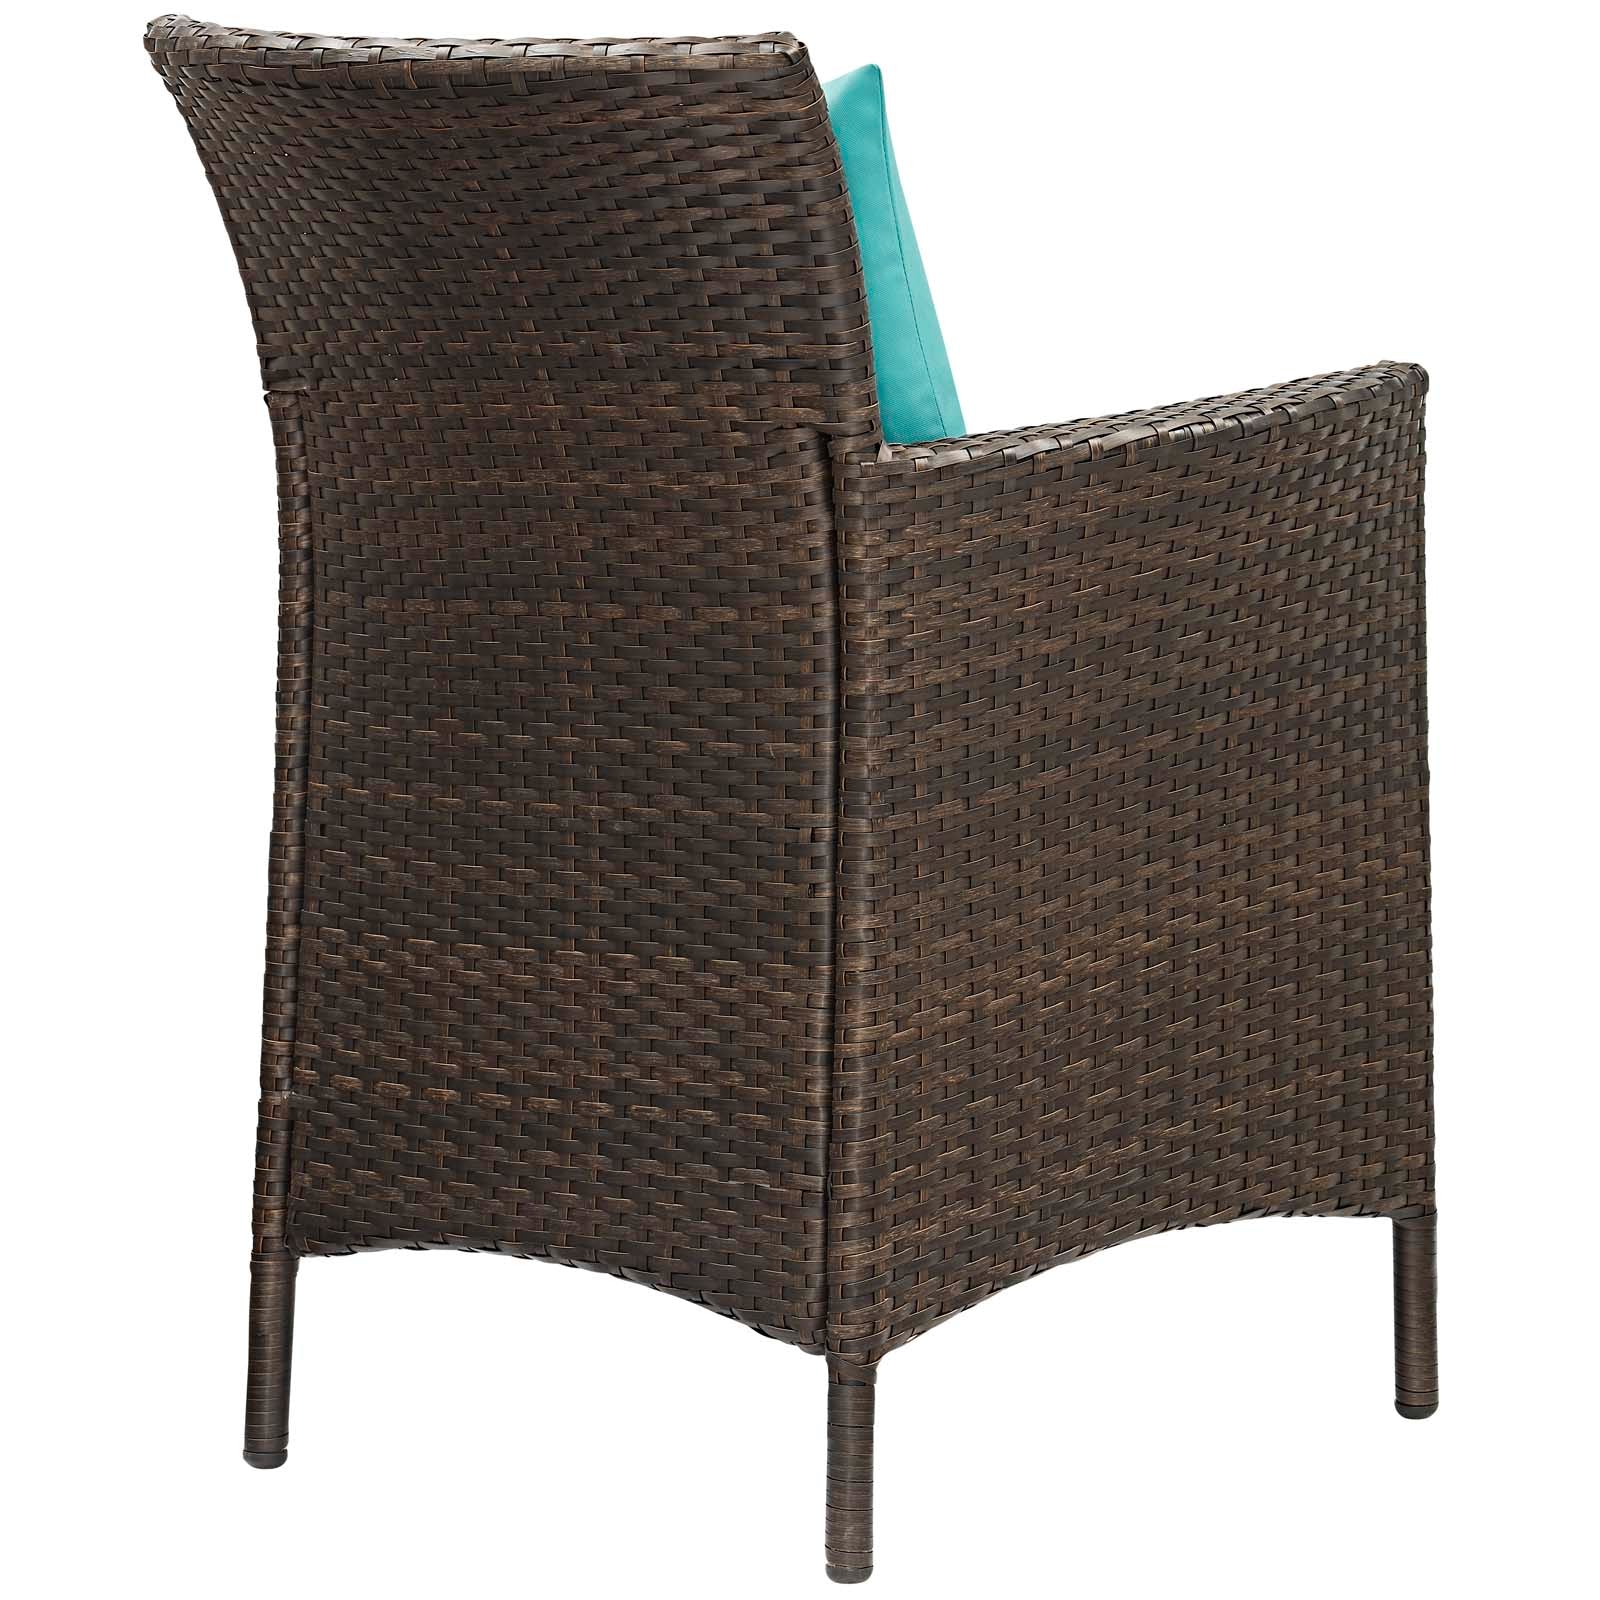 Modway Outdoor Dining Chairs - Conduit Outdoor Patio Wicker Rattan Dining Armchair Set of 4 Brown Turquoise